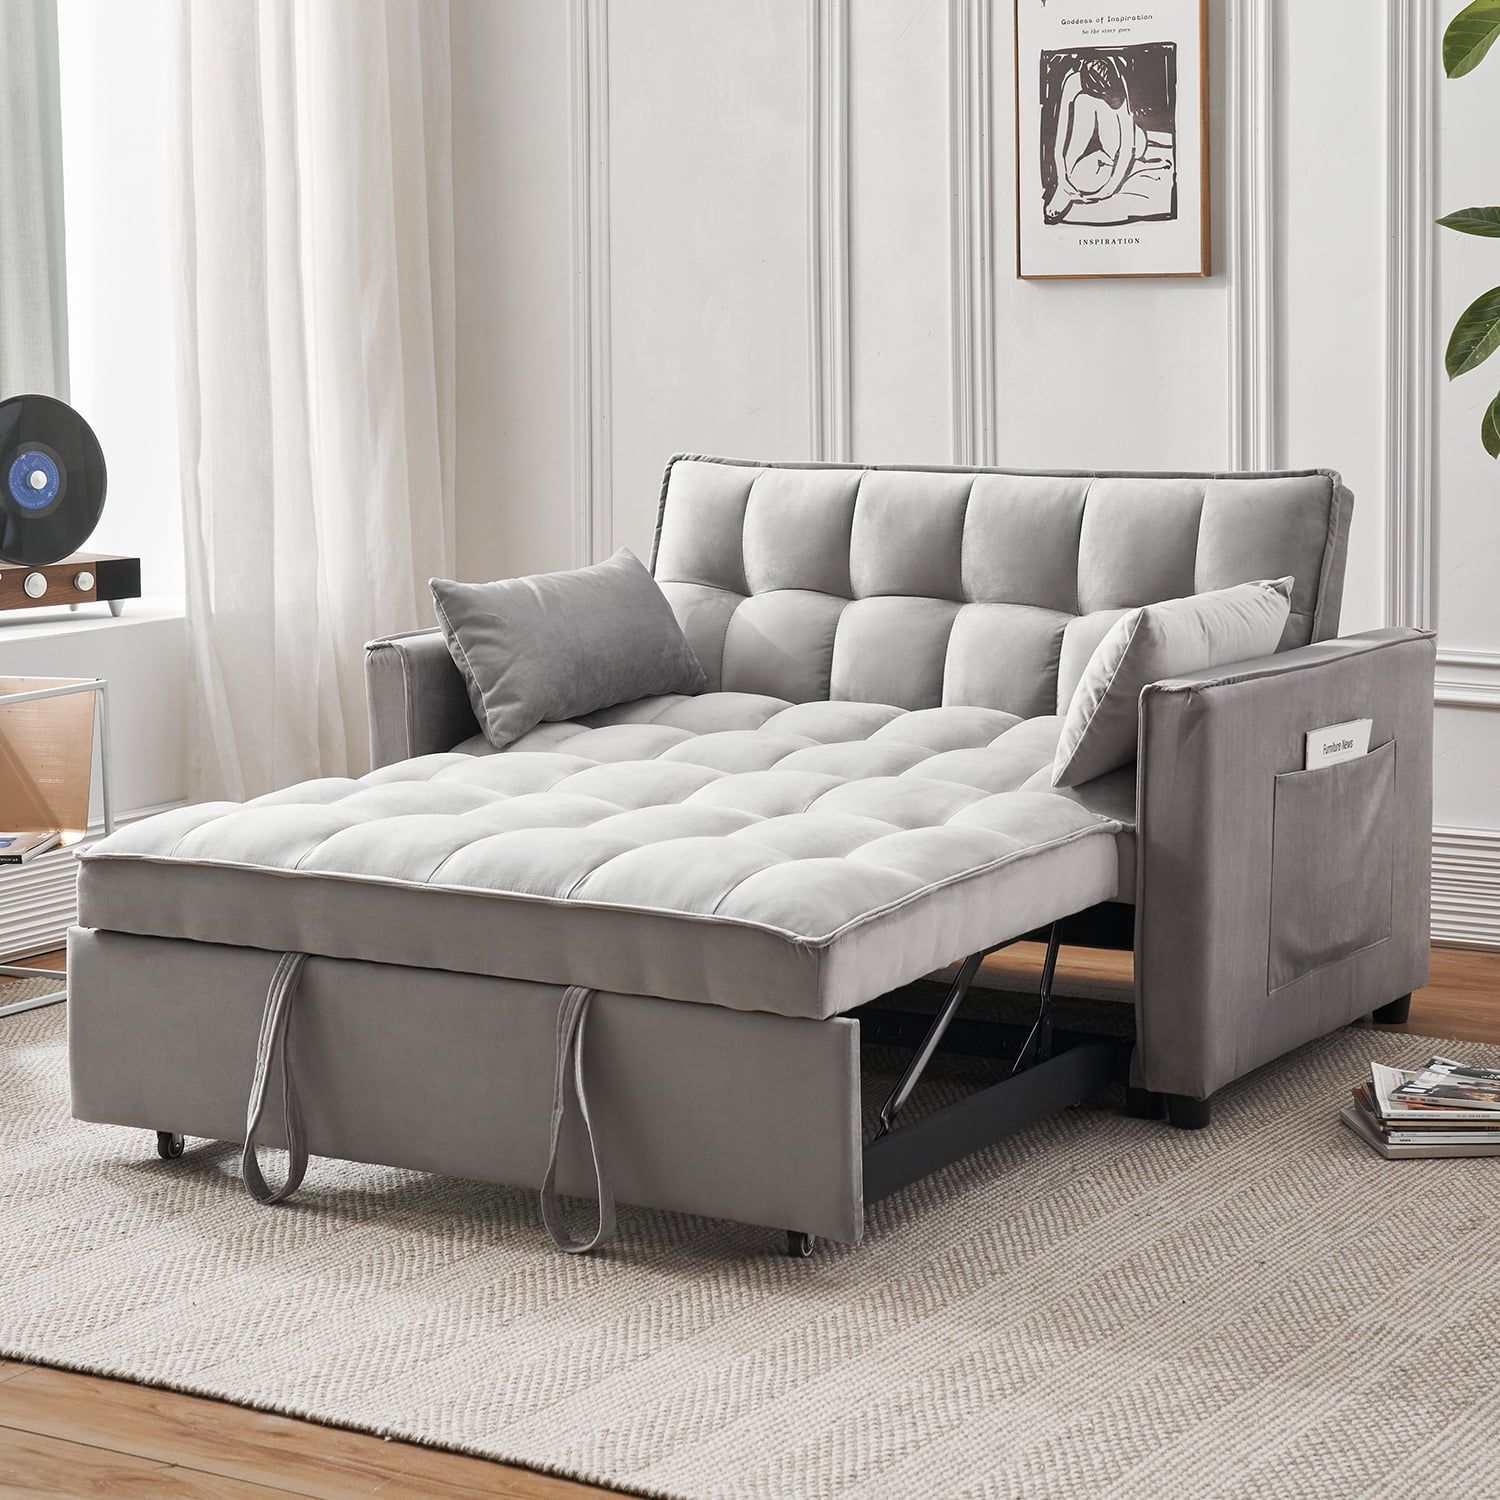 Tzicr 55.5'' 3 In 1 Convertible Sleeper Sofa Bed, Modern Velvet Loveseat  Futon Couch Pullout Bed With Adjustable Backrest, Side Storage Pockets And  Pillows. (Grey) – Walmart Pertaining To 3 In 1 Gray Pull Out Sleeper Sofas (Photo 4 of 15)